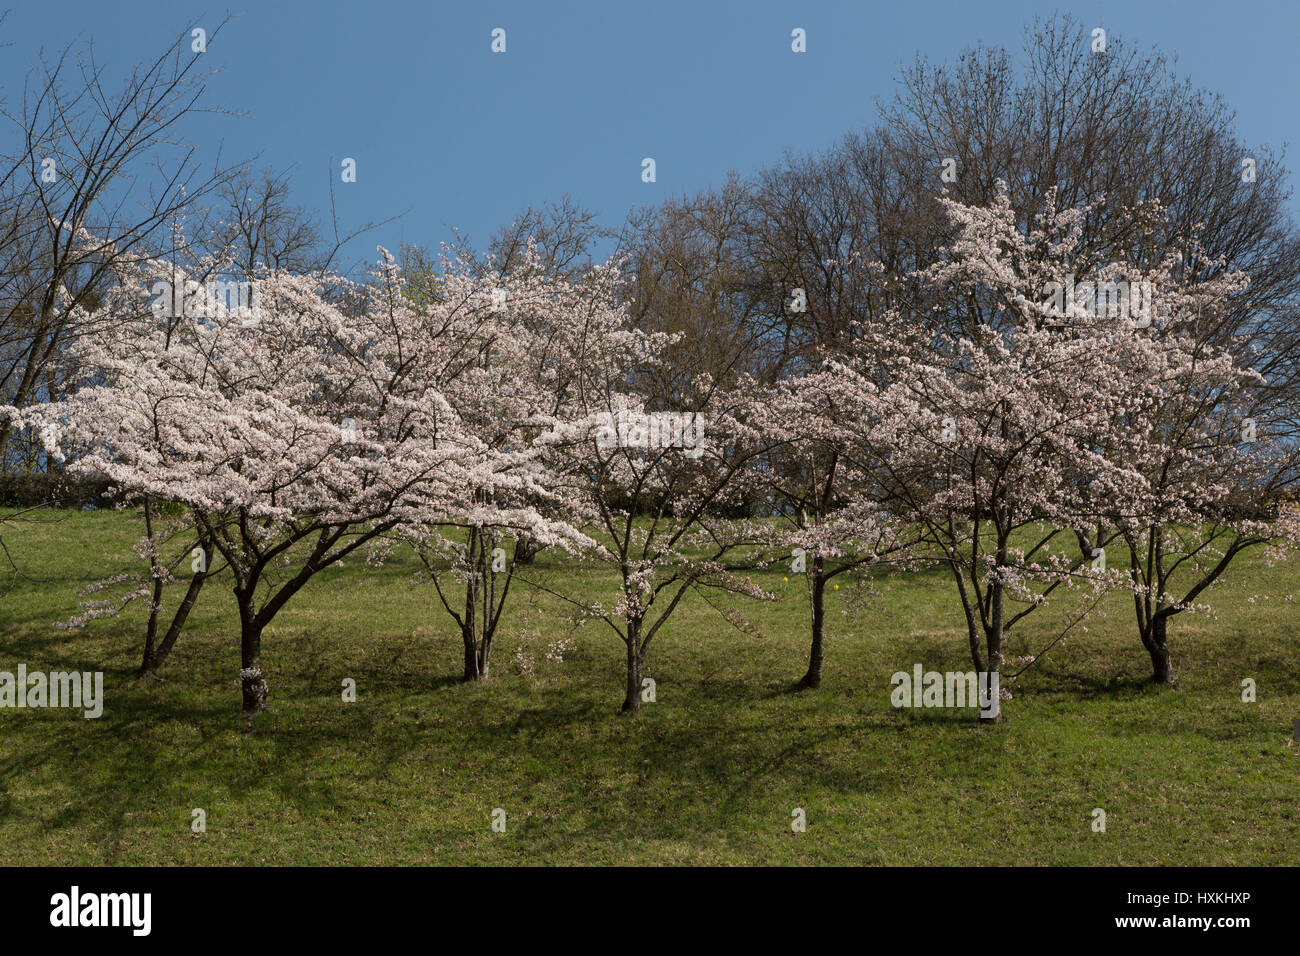 A photograph of some Japanese Cherry Blossoms in Bern, Switzerland. They are located in the public rose garden (Rosengarten) overlooking the city. Stock Photo